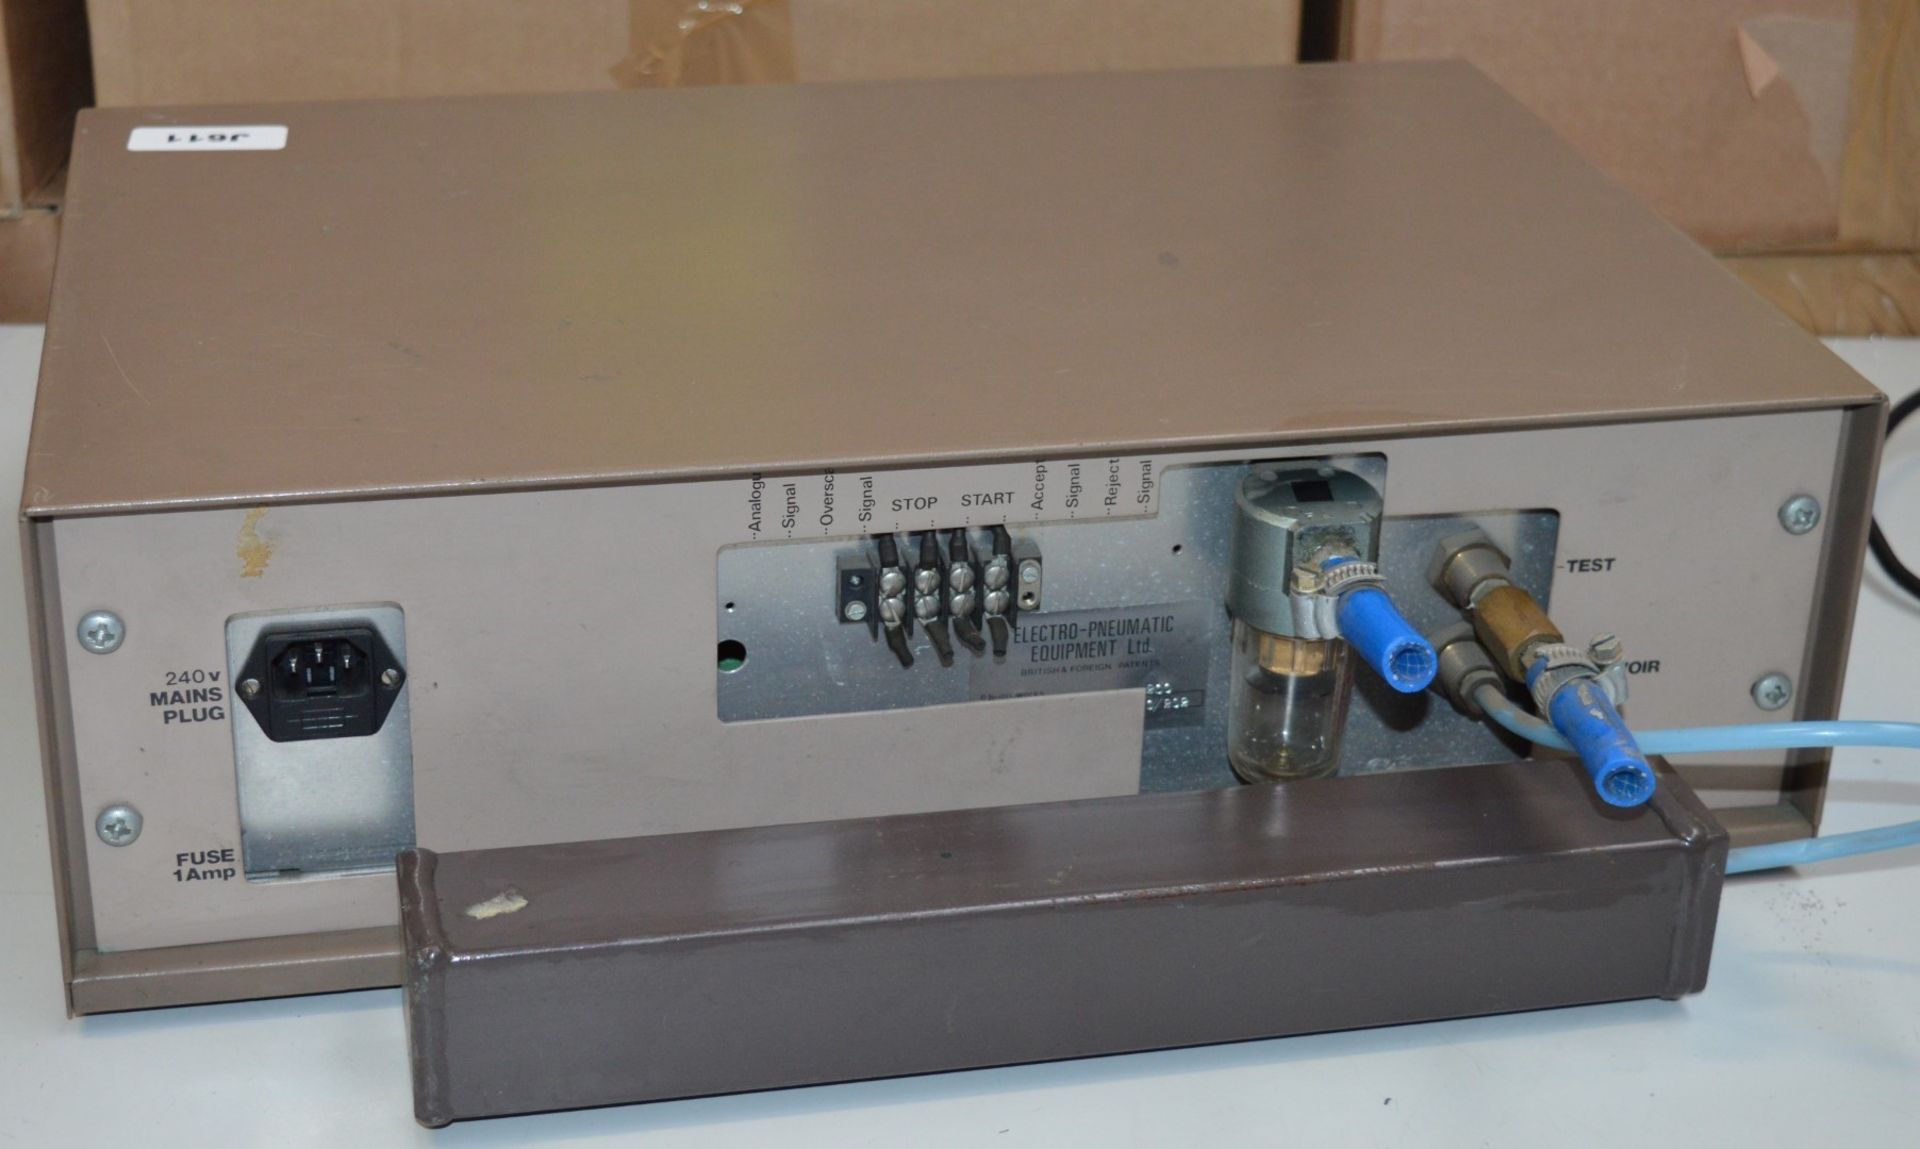 1 x Epetron 200 Mk2 Electro Pneumatic Tester - Vintage Test Equipment - CL011 - Ref J611 - Location: - Image 7 of 8